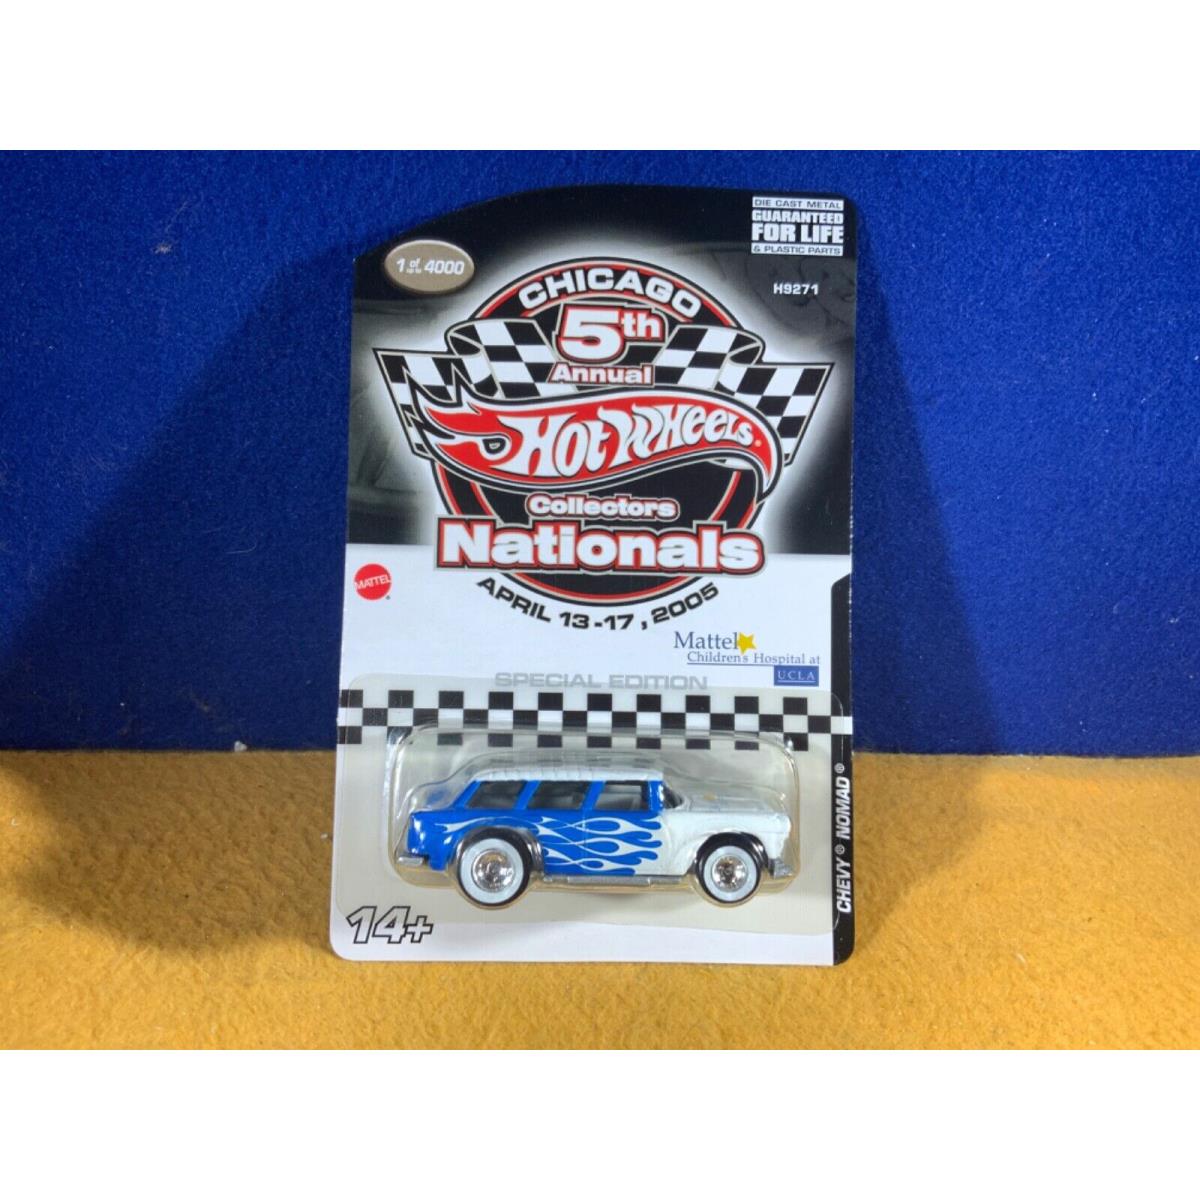 F10-52 Hot Wheels 5th Collectors Nationals - Chevy Nomad - 2005 - Blue